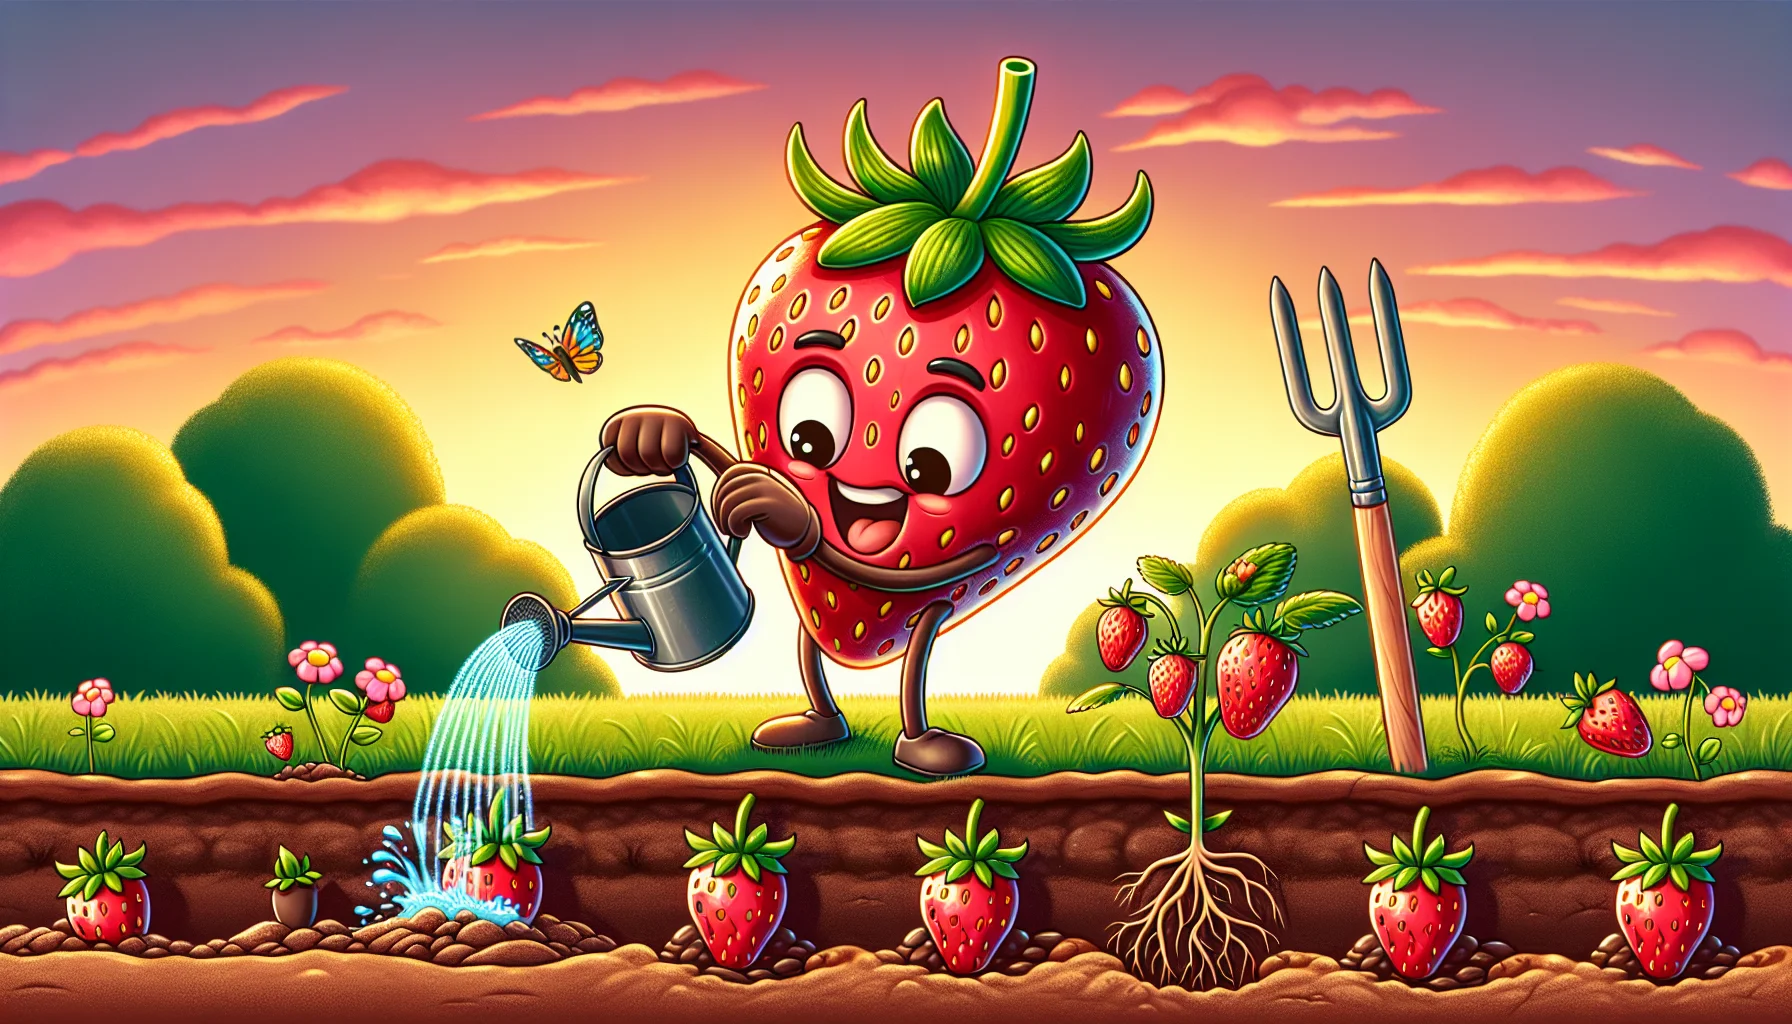 Create a comical scene of an animated strawberry with human-like features watering a garden full of sprouting strawberry plants. The strawberry character is joyfully showing a step-by-step process, from planting a tiny seed in rich, fertile soil, to watering it carefully, and finally, watching a strawberry plant sprout, bearing ripe, juicy fruits. The scene is intended to inspire people to explore gardening and enjoy the process of growing strawberries from seed. To make the scene enticing, include a vibrant sunset backdrop, colorful gardening tools, and playful garden creatures like butterflies and earthworms.